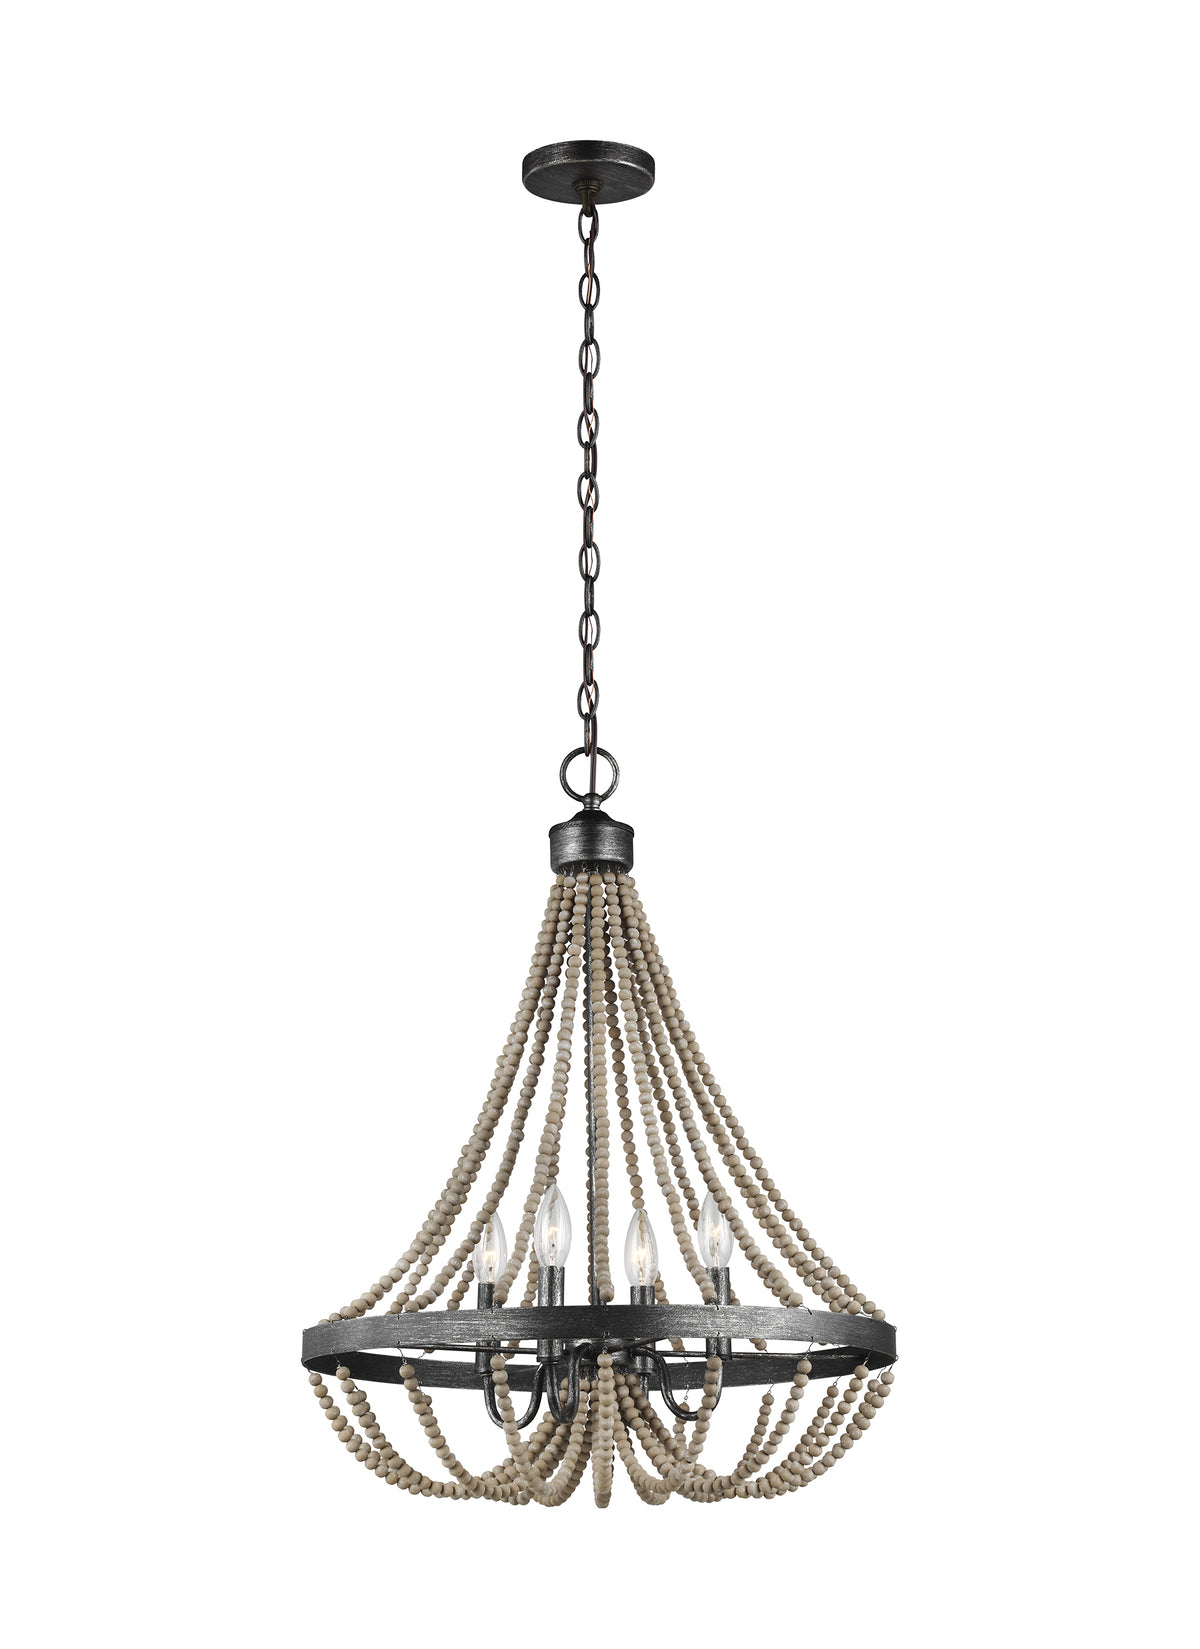 Oglesby Four Light Chandelier Sea Gull Collection